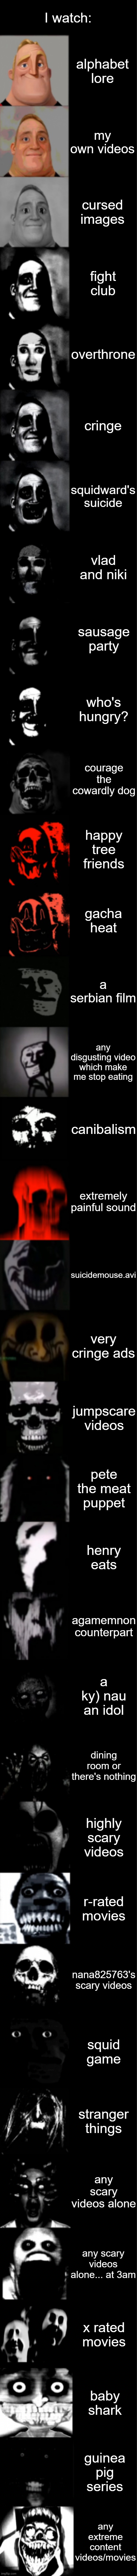 i'm out of ideas now | I watch:; alphabet lore; my own videos; cursed images; fight club; overthrone; cringe; squidward's suicide; vlad and niki; sausage party; who's hungry? courage the cowardly dog; happy tree friends; gacha heat; a serbian film; any disgusting video which make me stop eating; canibalism; extremely painful sound; suicidemouse.avi; very cringe ads; jumpscare videos; pete the meat puppet; henry eats; agamemnon counterpart; a ky) nau an idol; dining room or there's nothing; highly scary videos; r-rated movies; nana825763's scary videos; squid game; stranger things; any scary videos alone; any scary videos alone... at 3am; x rated movies; baby shark; guinea pig series; any extreme content videos/movies | image tagged in mr incredible becoming uncanny super extended hd | made w/ Imgflip meme maker